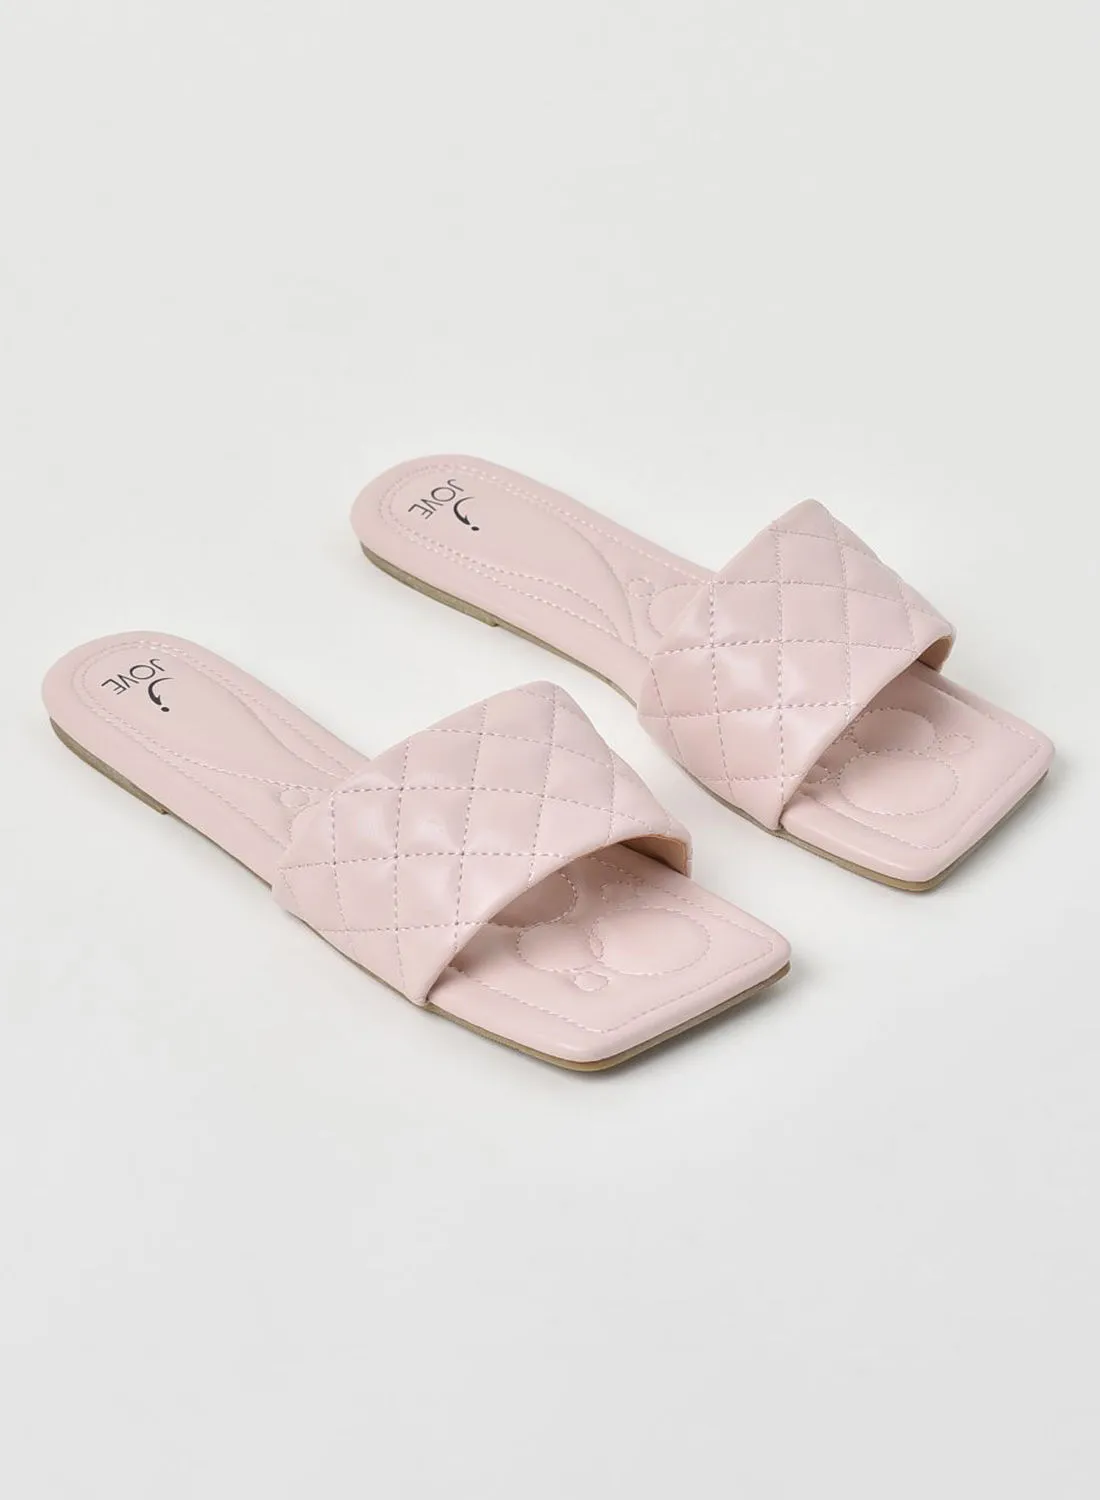 Jove Quilted Pattern Broad Strap Flat Sandals Pink